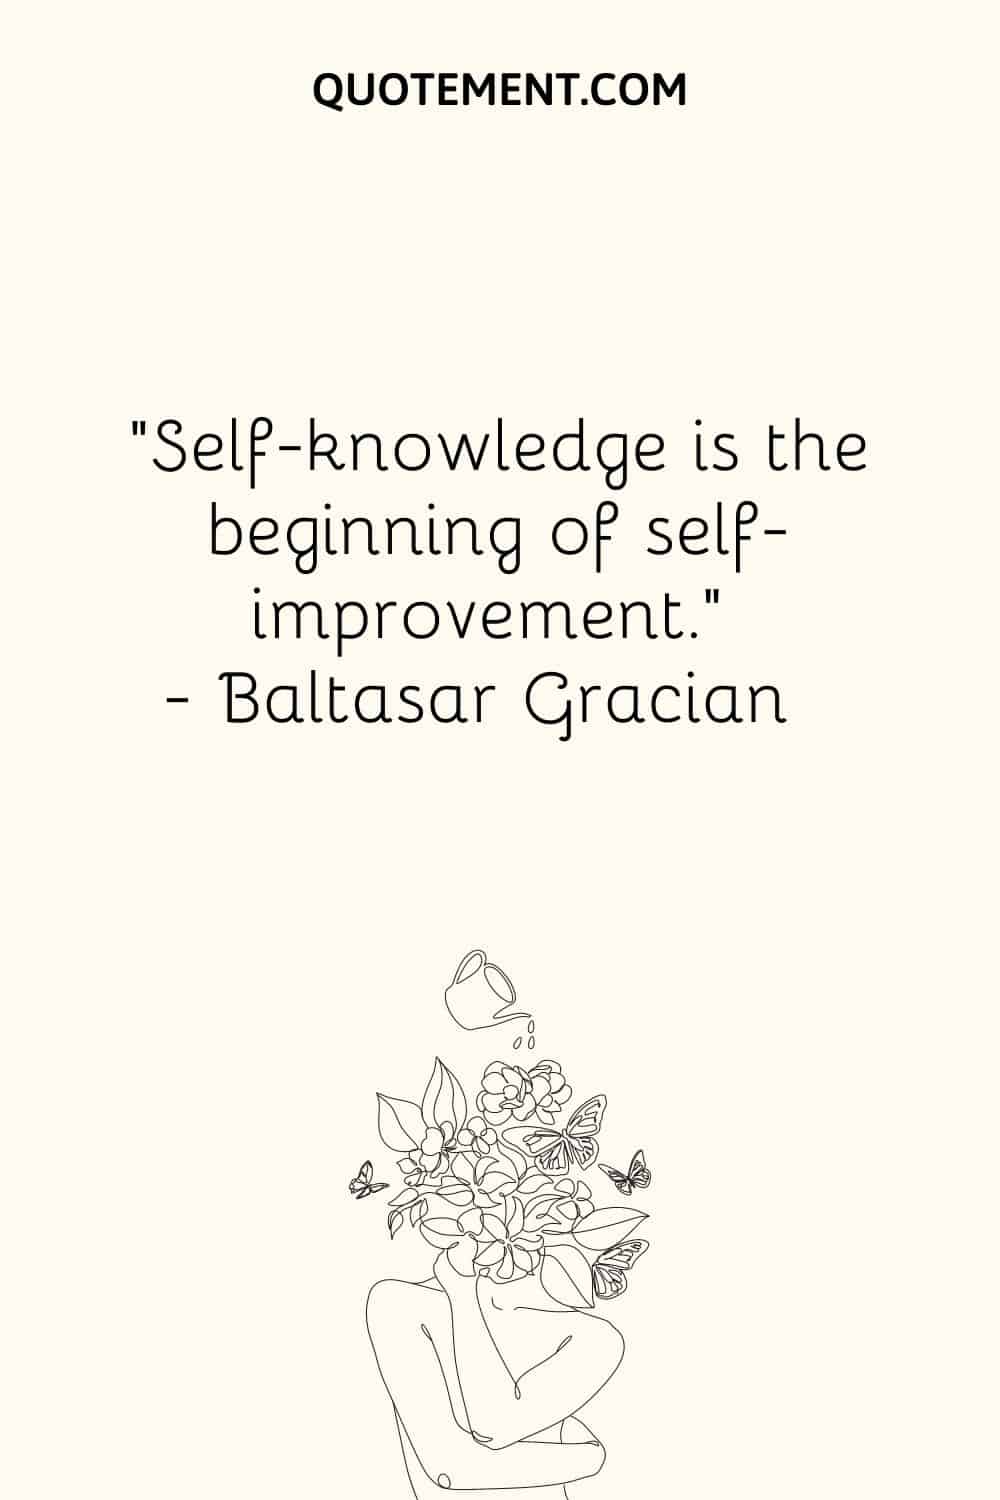 Self-knowledge is the beginning of self-improvement